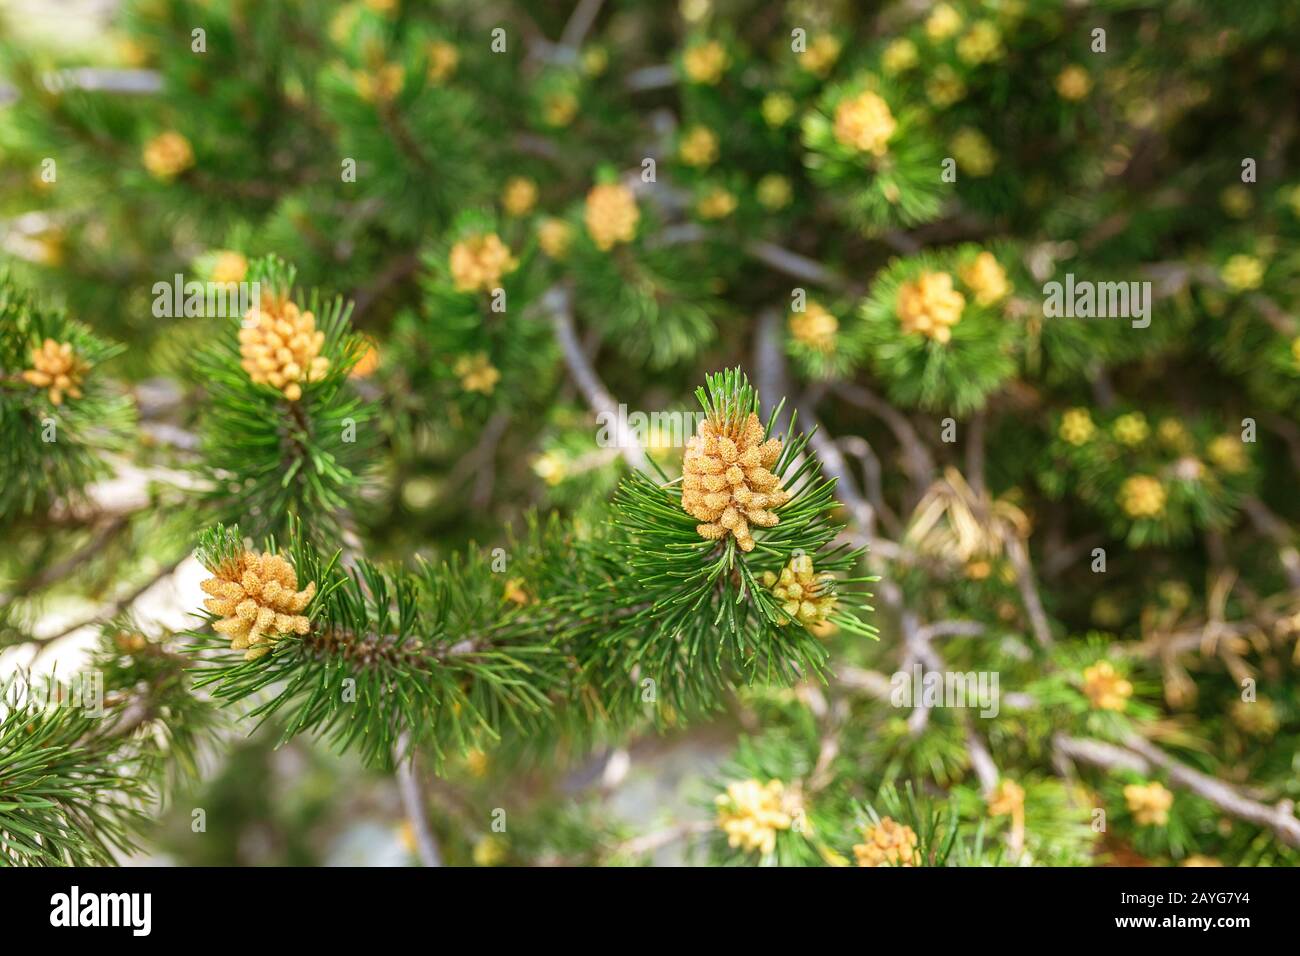 Young shoots of pine in early spring. Stock Photo